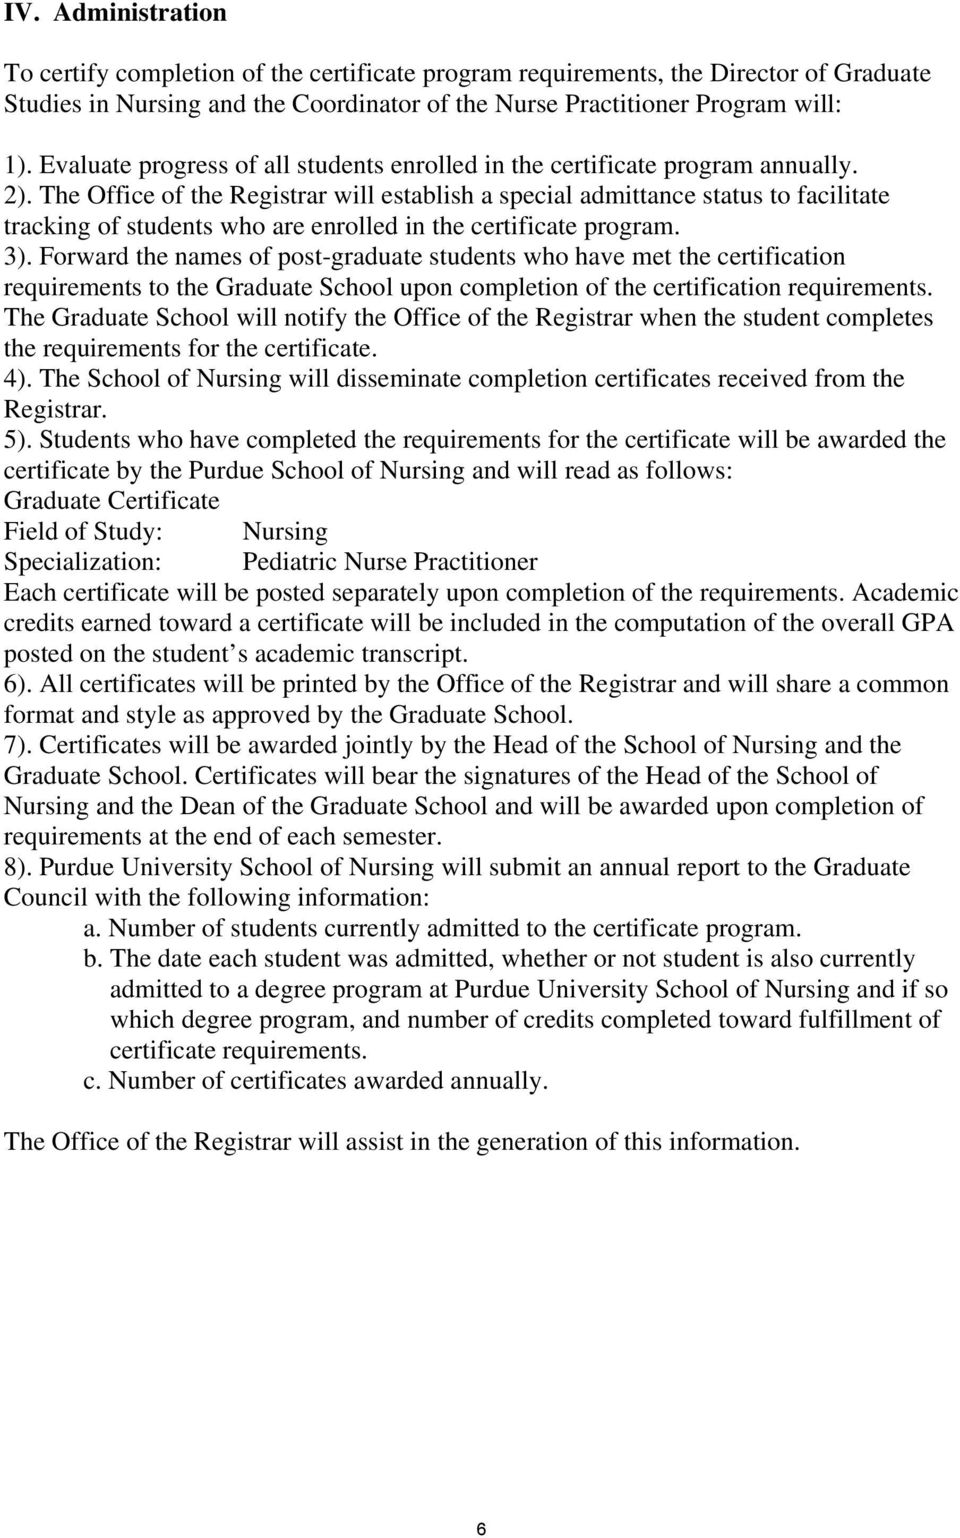 The Office of the Registrar will establish a special admittance status to facilitate tracking of students who are enrolled in the certificate program. 3).